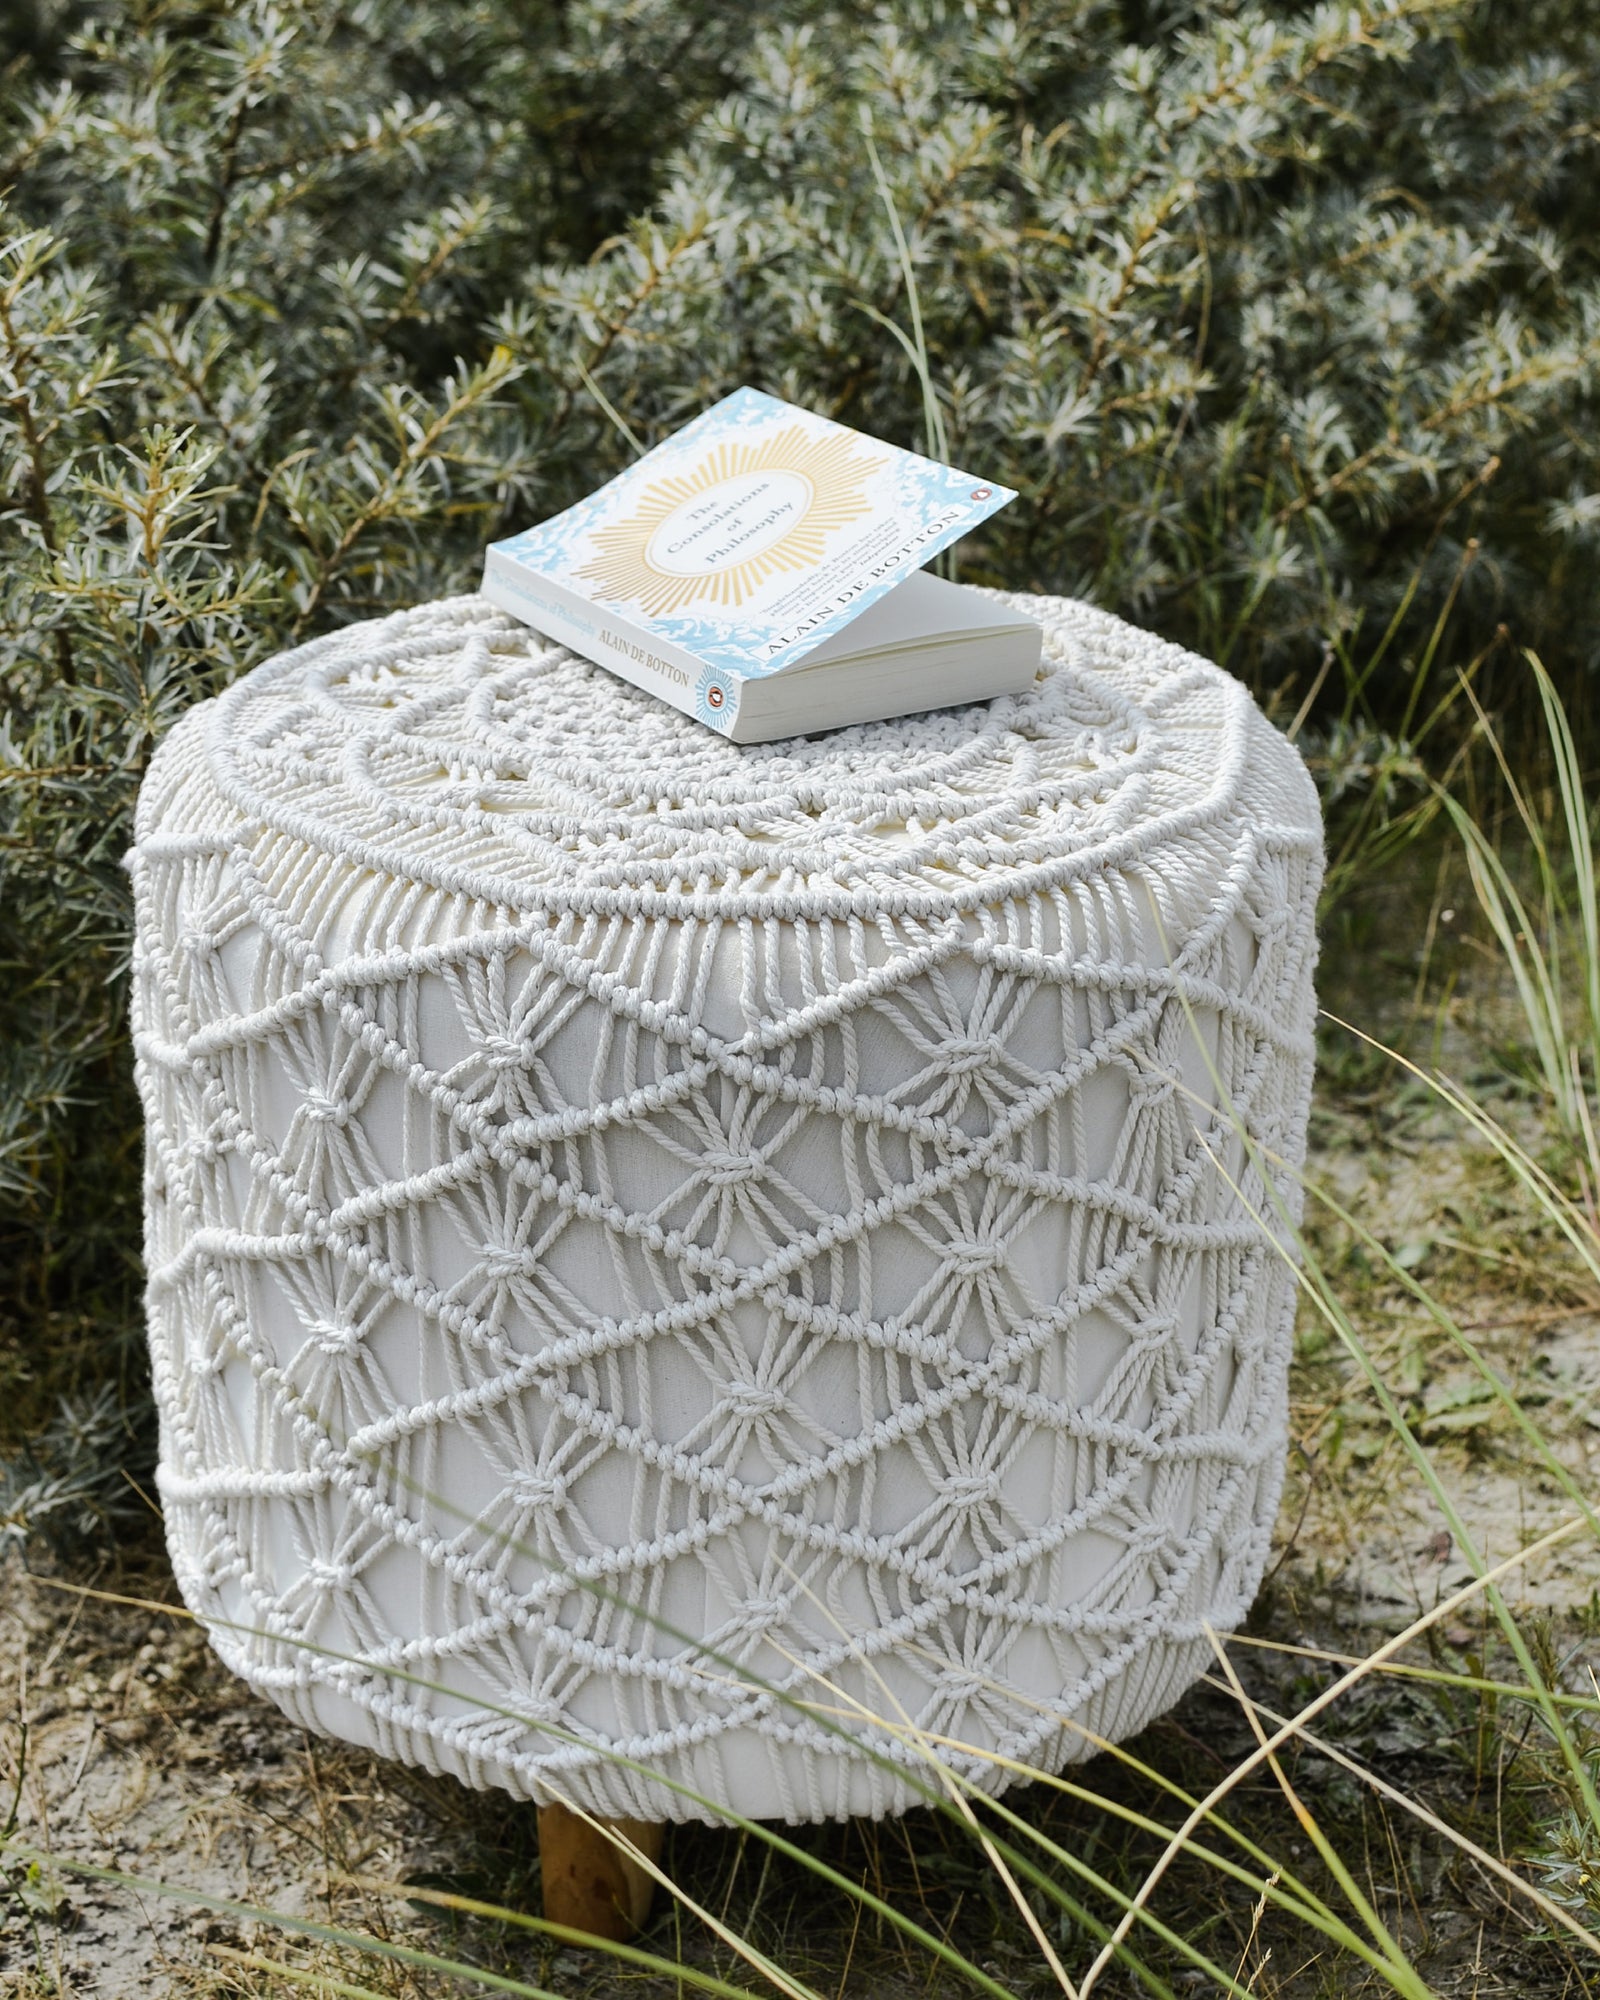 Macrame Pouf Stool  With Wooden Legs